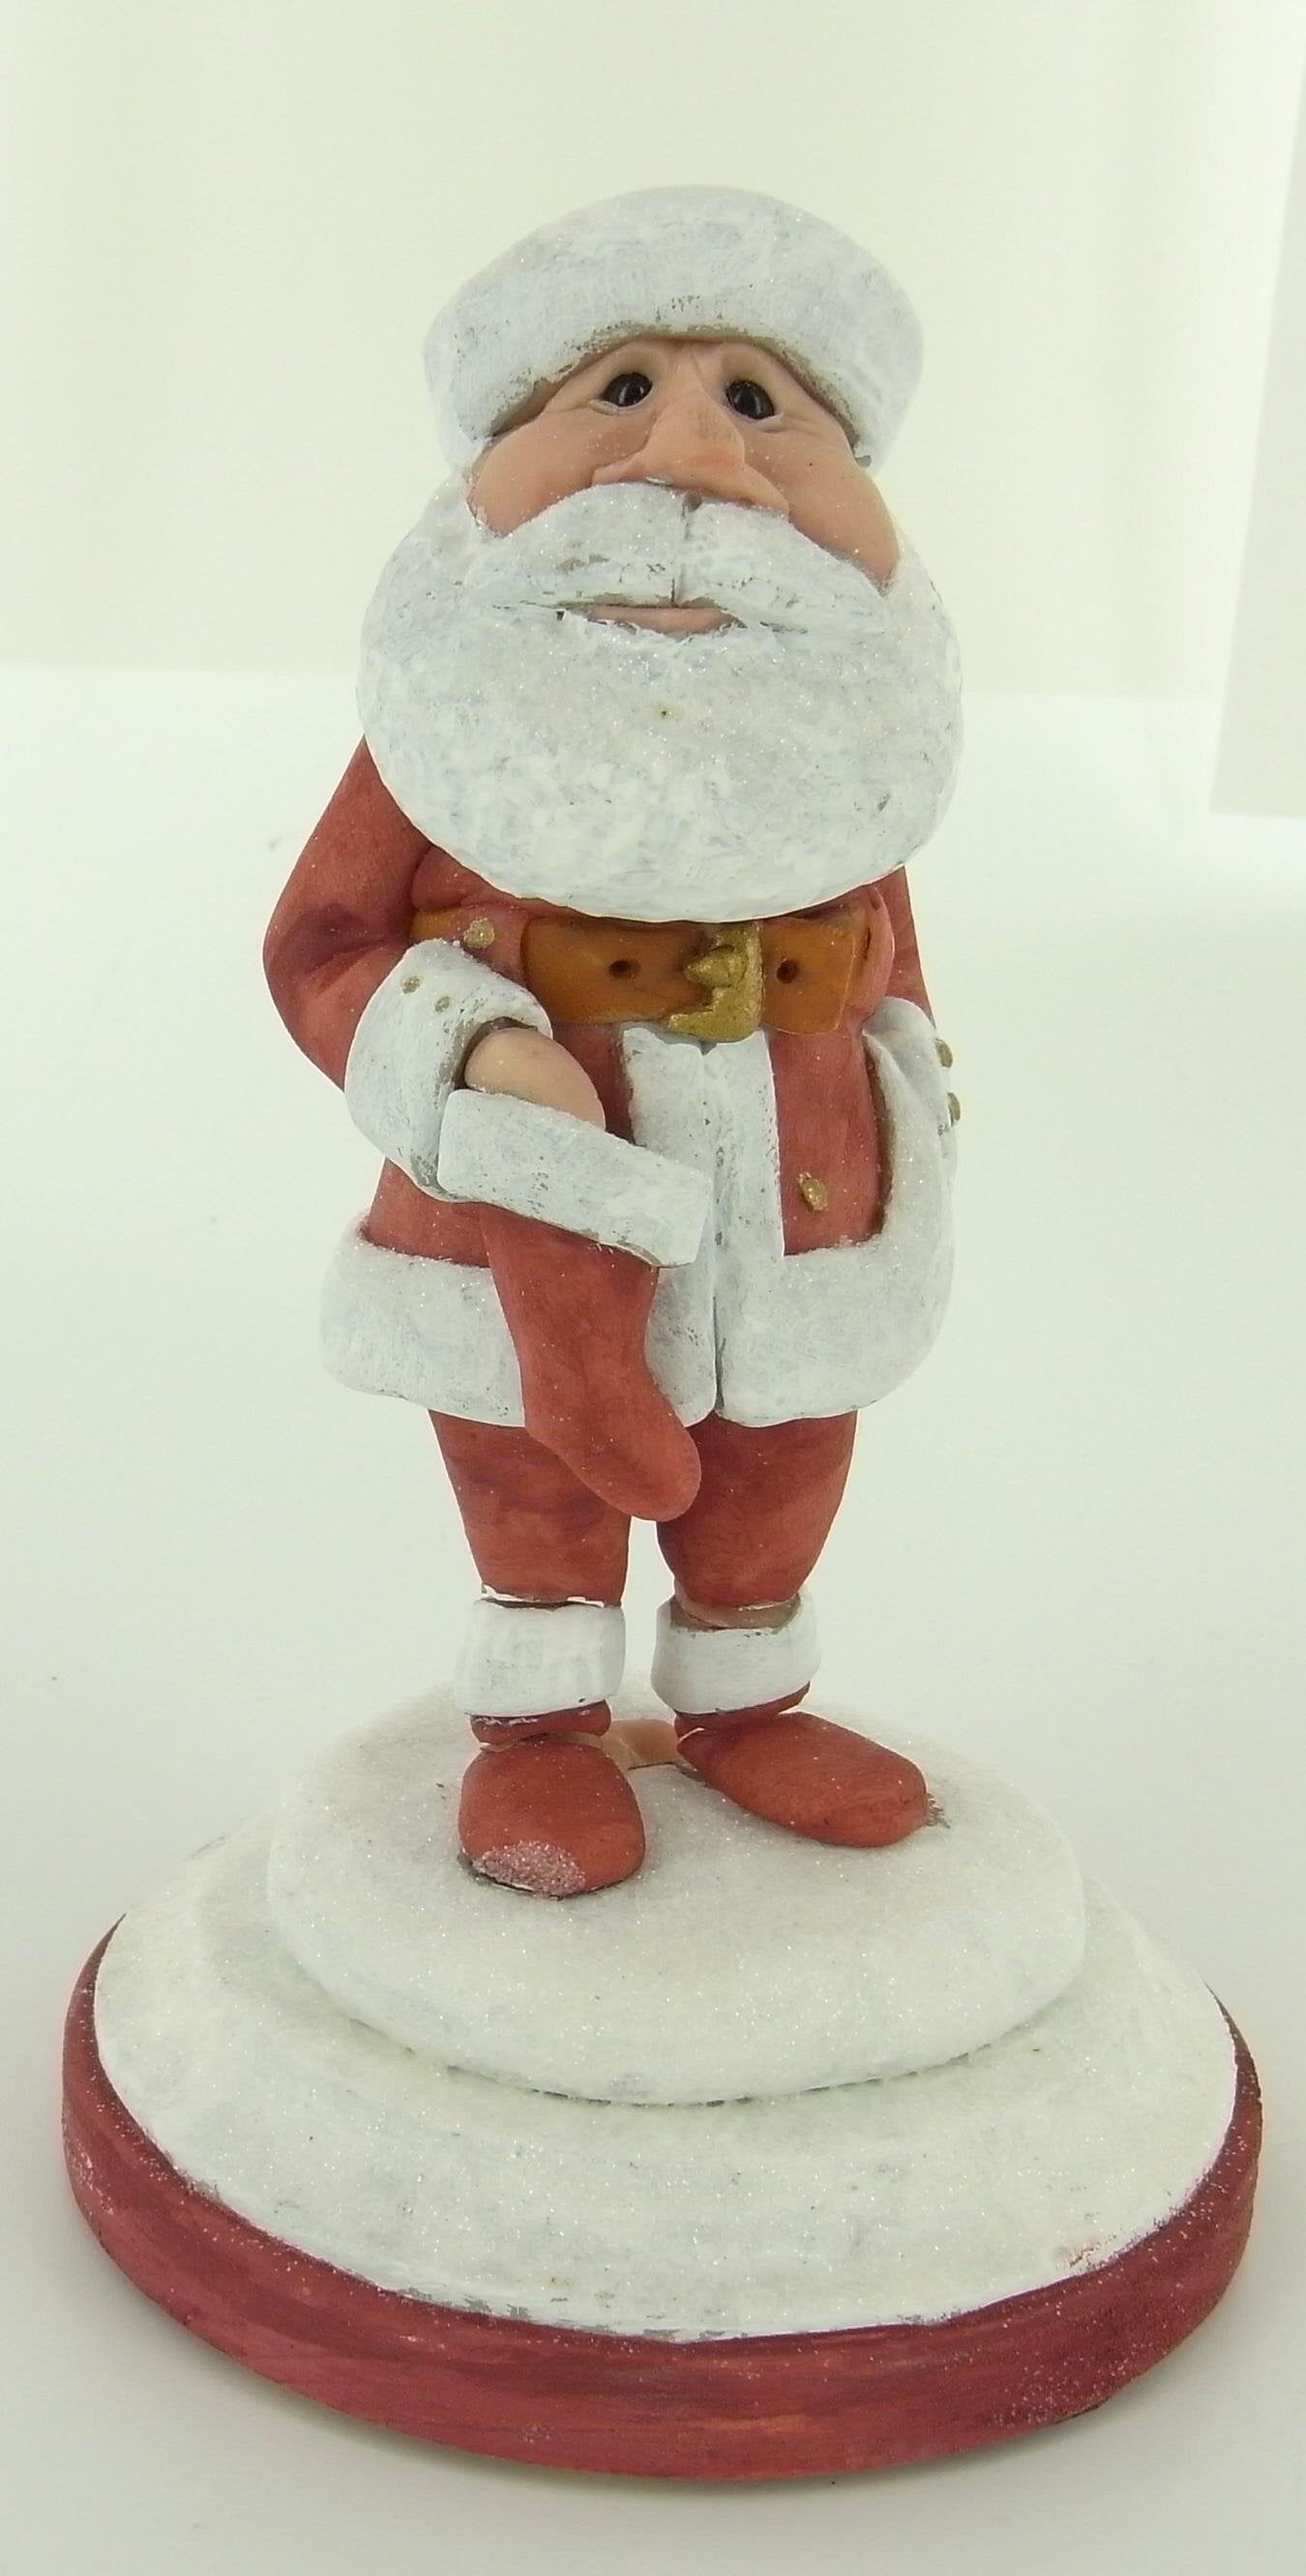 Super Sculpey® Santa Claus Is Coming To Town!